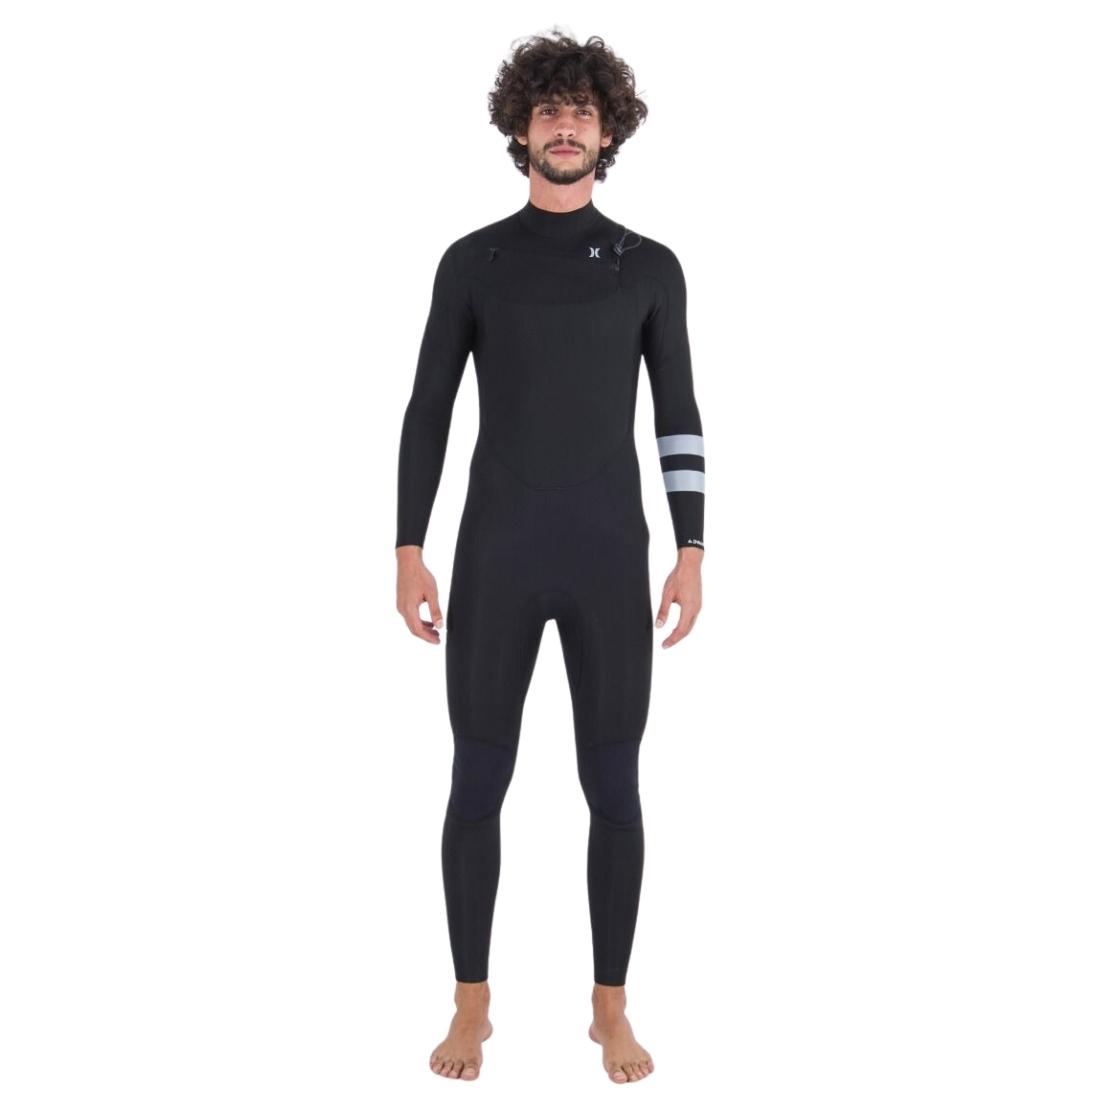 Hurley Mens Advantage 3/2mm Wetsuit - Black - Mens Full Length Wetsuit by Hurley